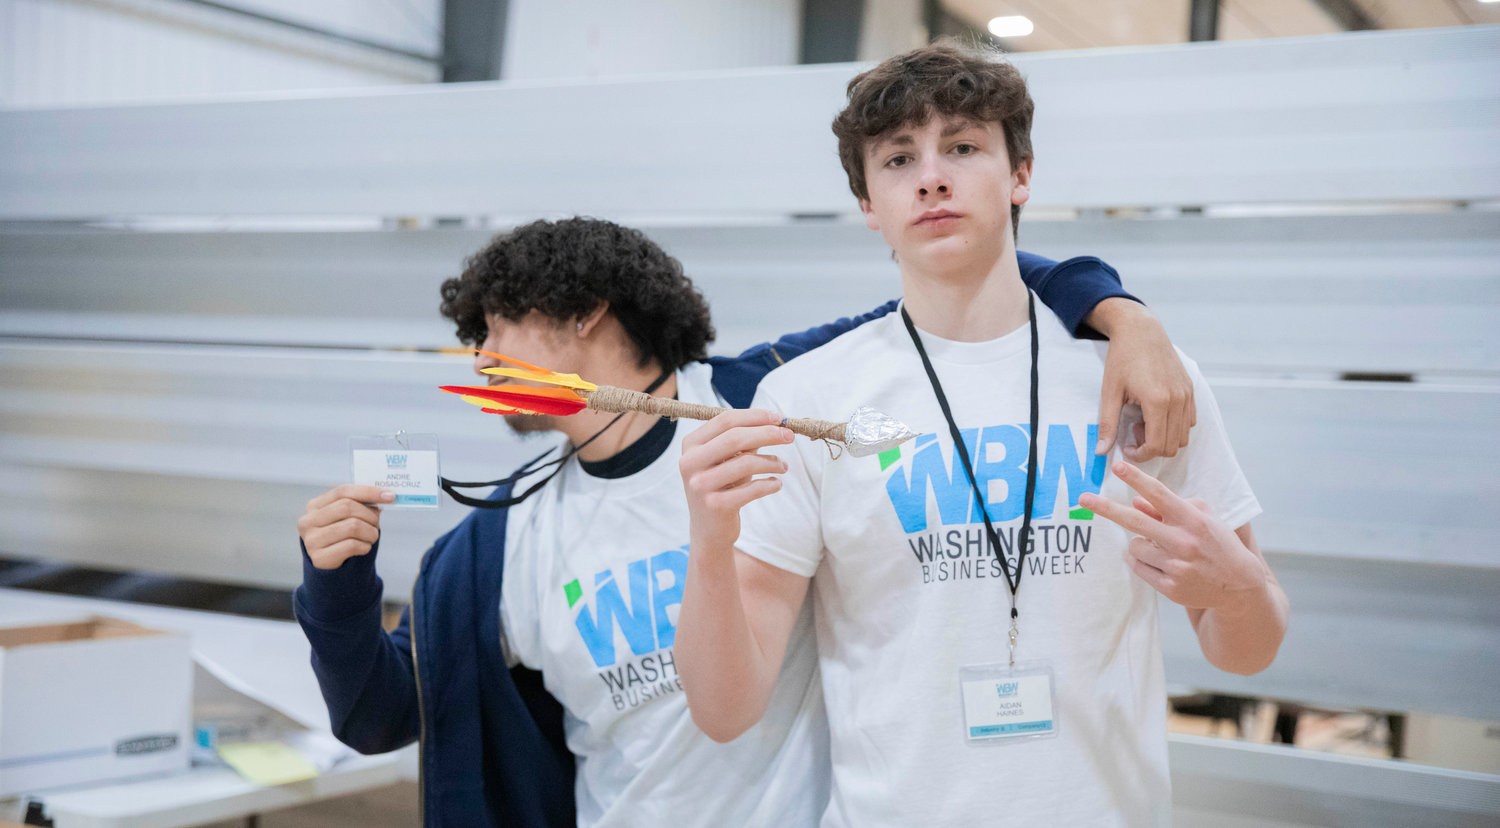 Centralia High School students Andre Rosas-Cruz and Aidan Haines pose for a photo with an arrow created for their company Bullseye Co. during Washington Business Week at the Northwest Sports Hub.